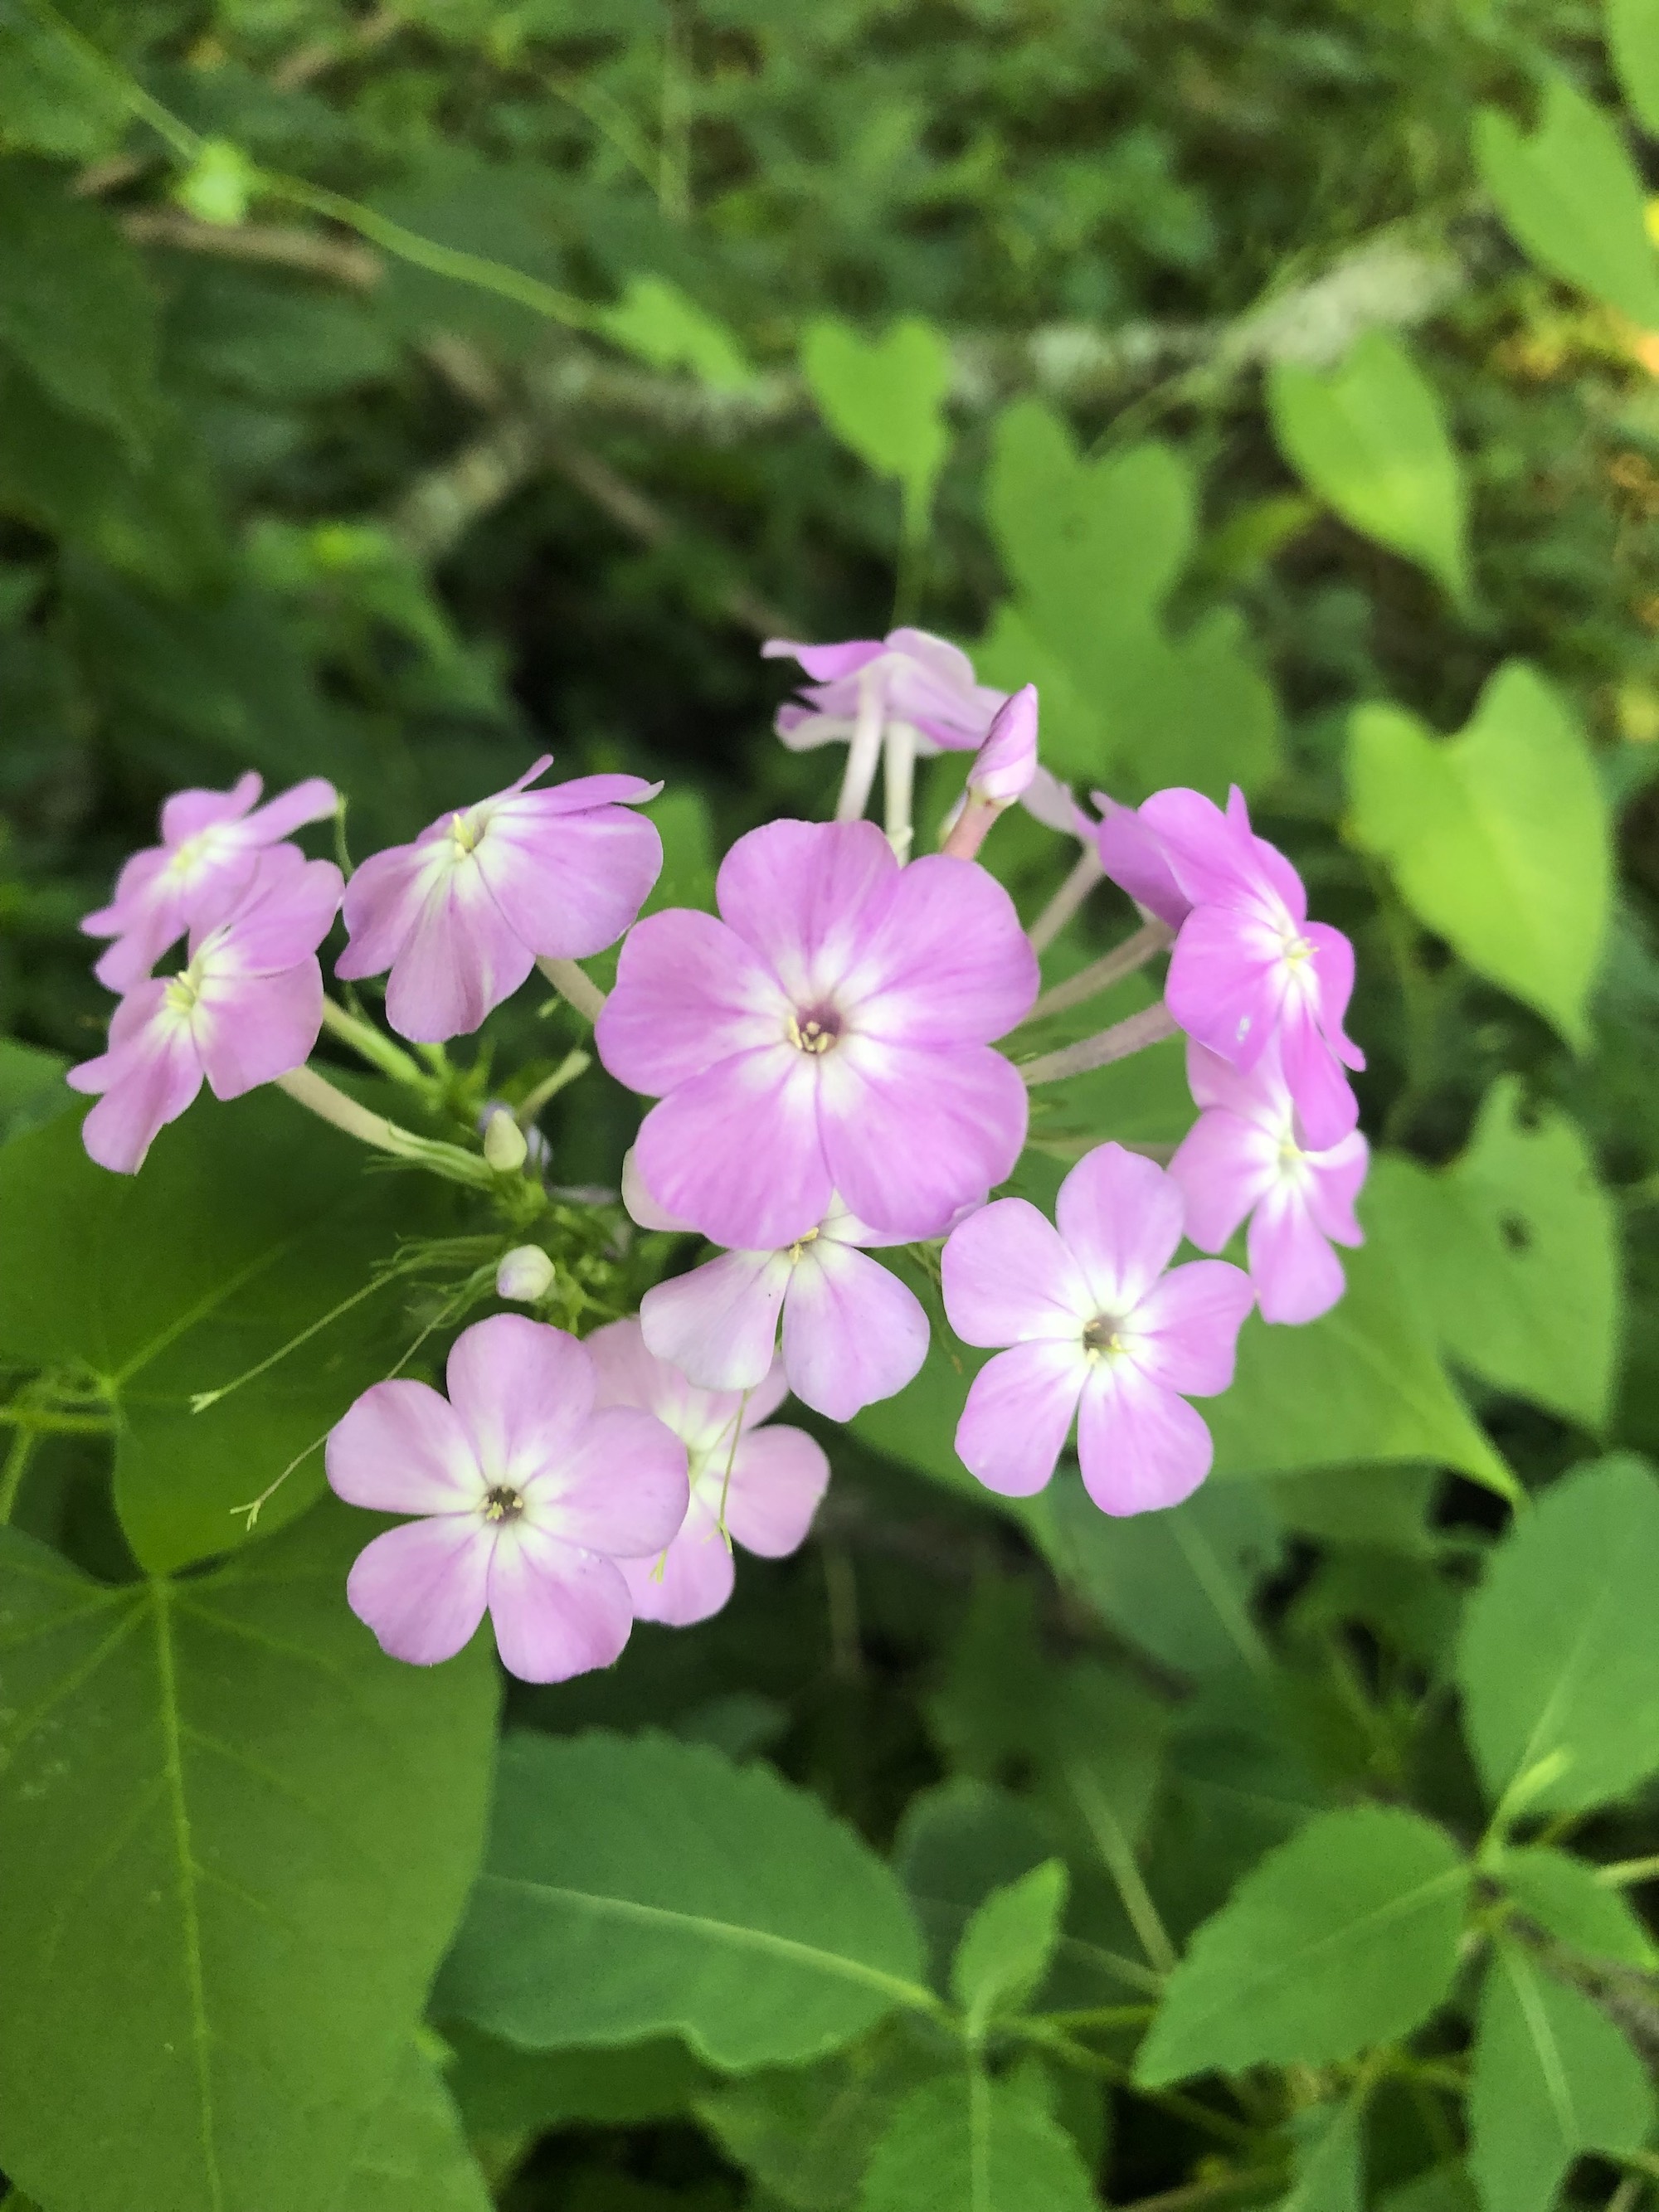 Tall Garden Phlox by Duck Pond on July 13, 201.